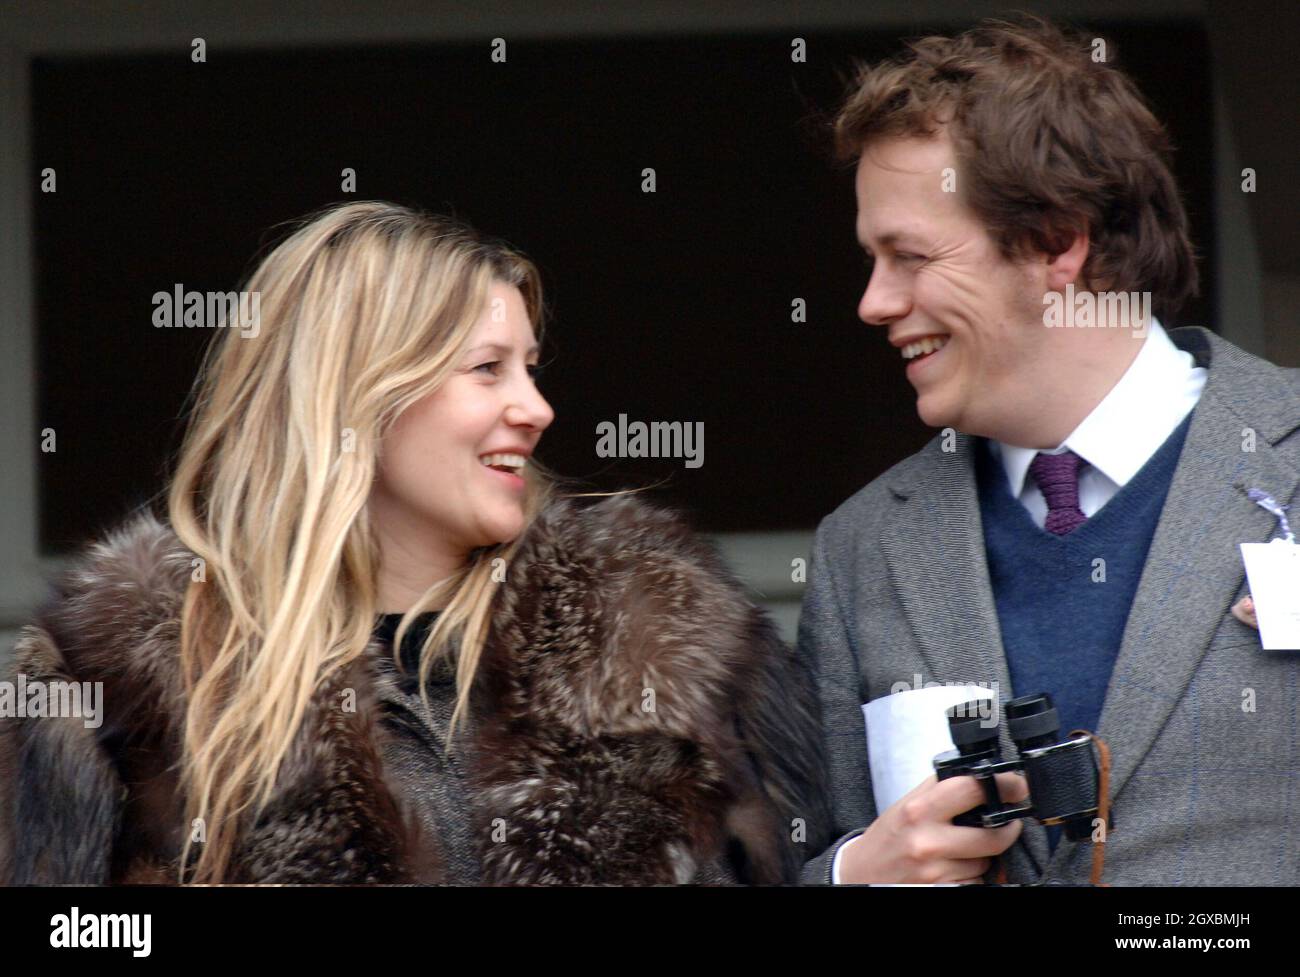 Tom Parker Bowles and his wife Sara attend Gold Cup Day at Cheltenham Races on March 17, 2006. Anwar Hussein/allactiondigital.com  Stock Photo